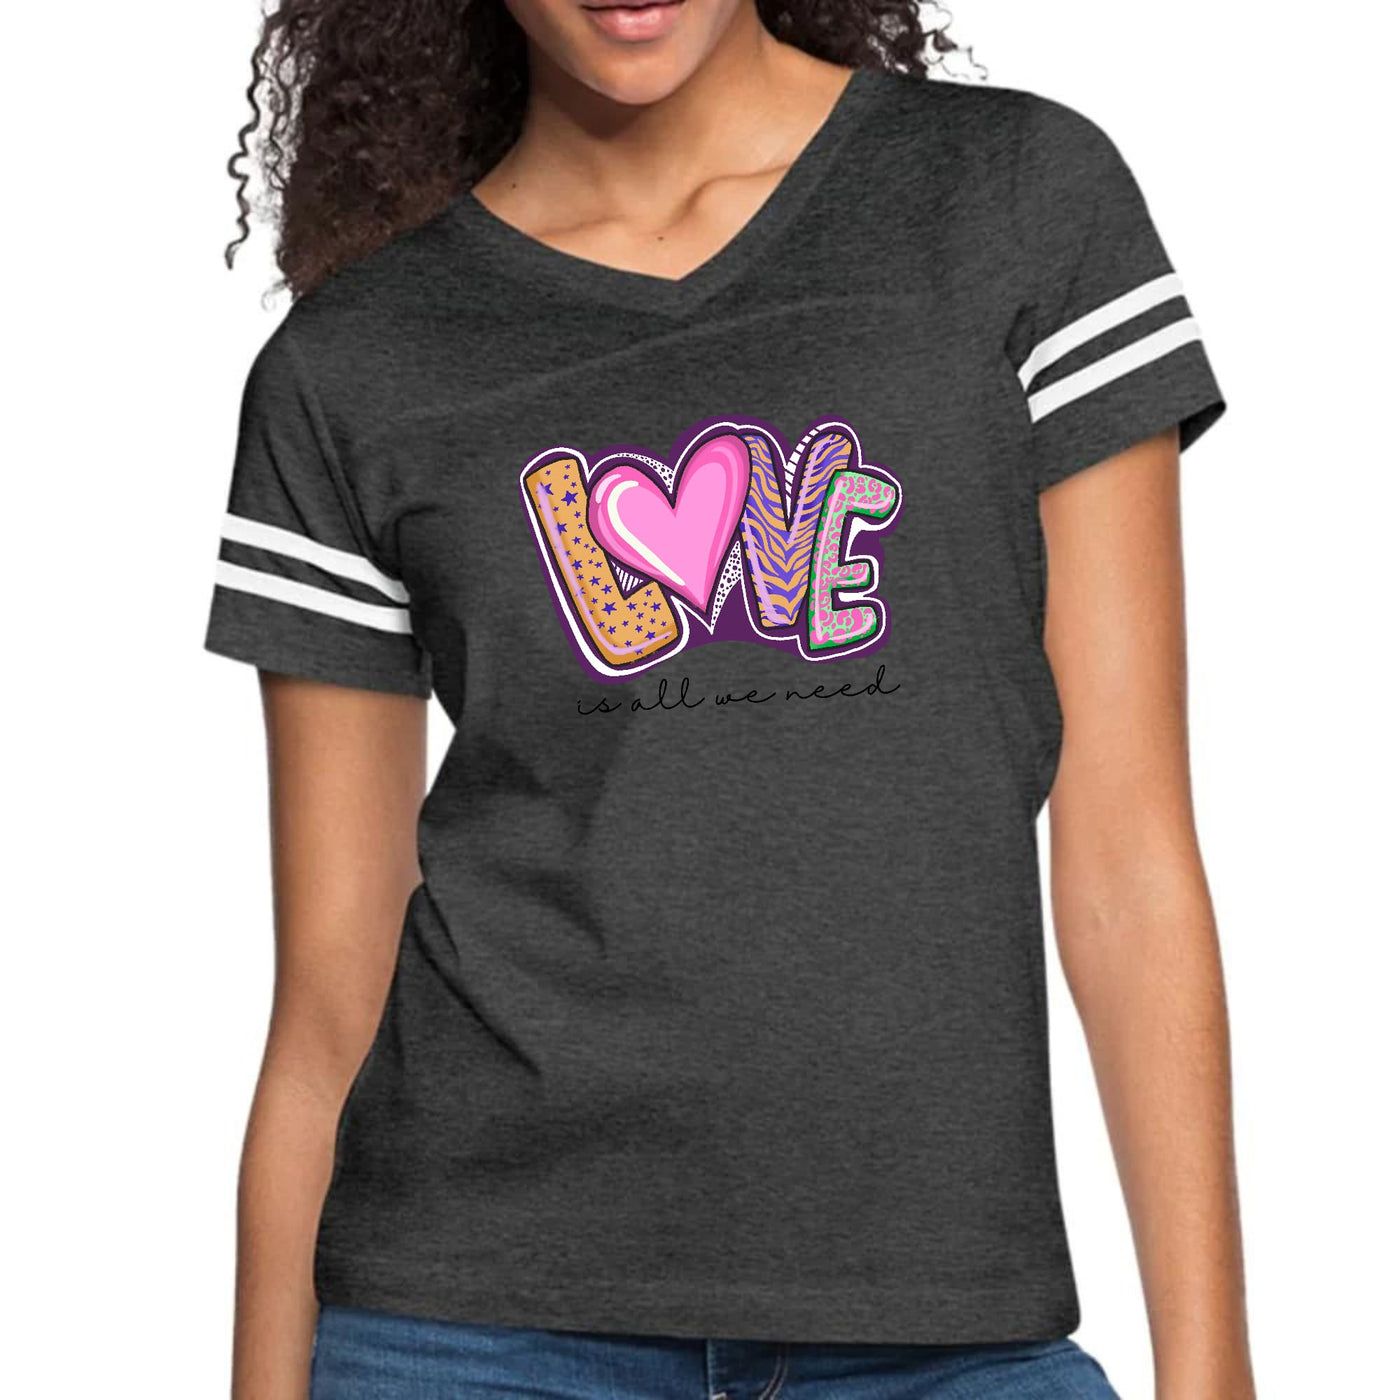 Womens Vintage Sport Graphic T-shirt Say It Soul - Love Is All We - Womens